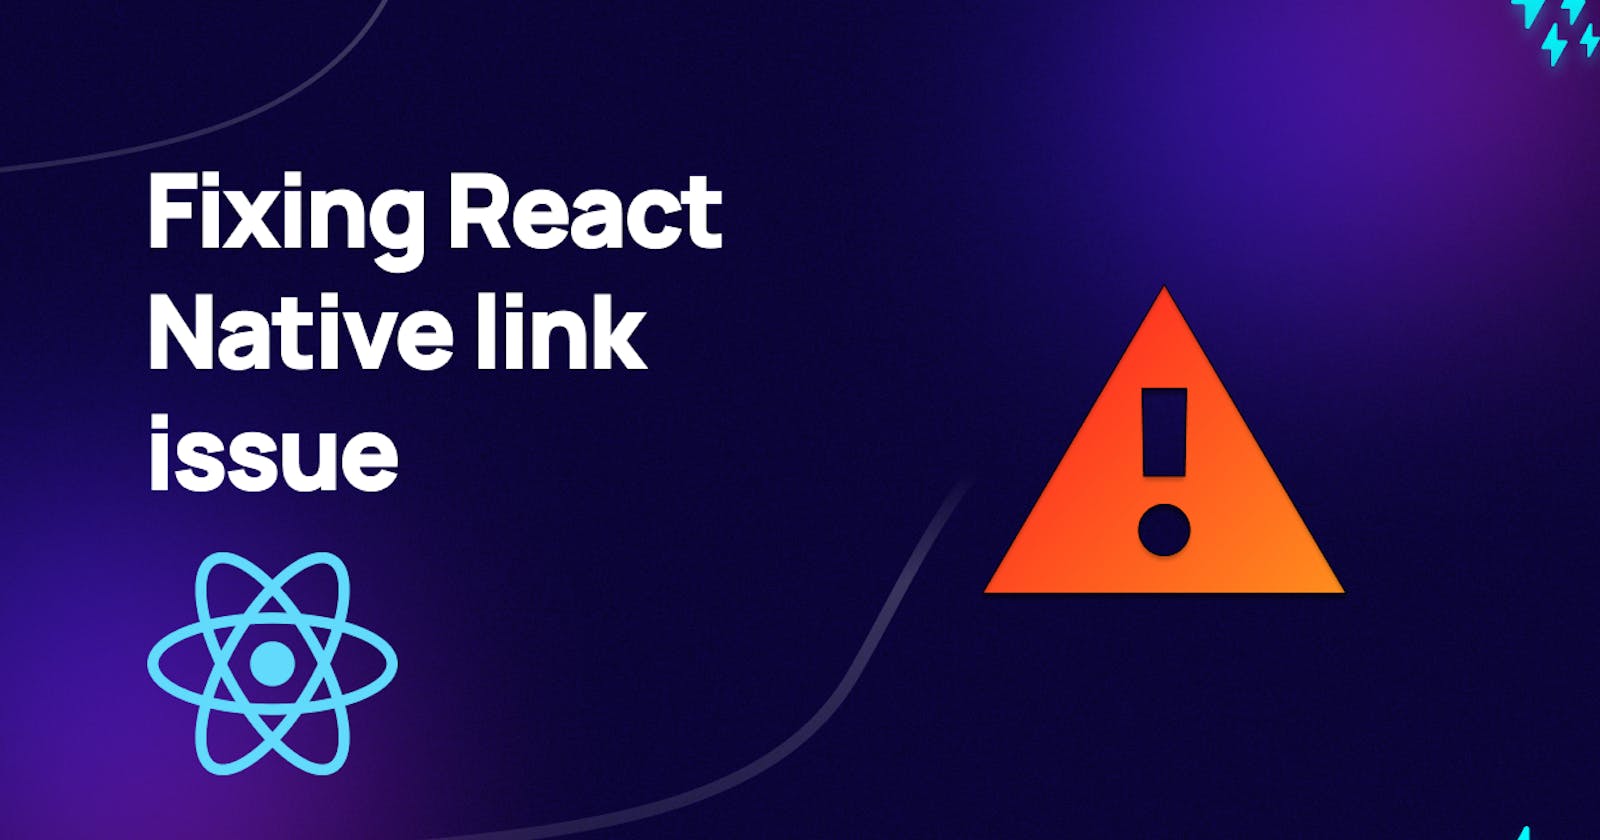 Fixing React Native link issue